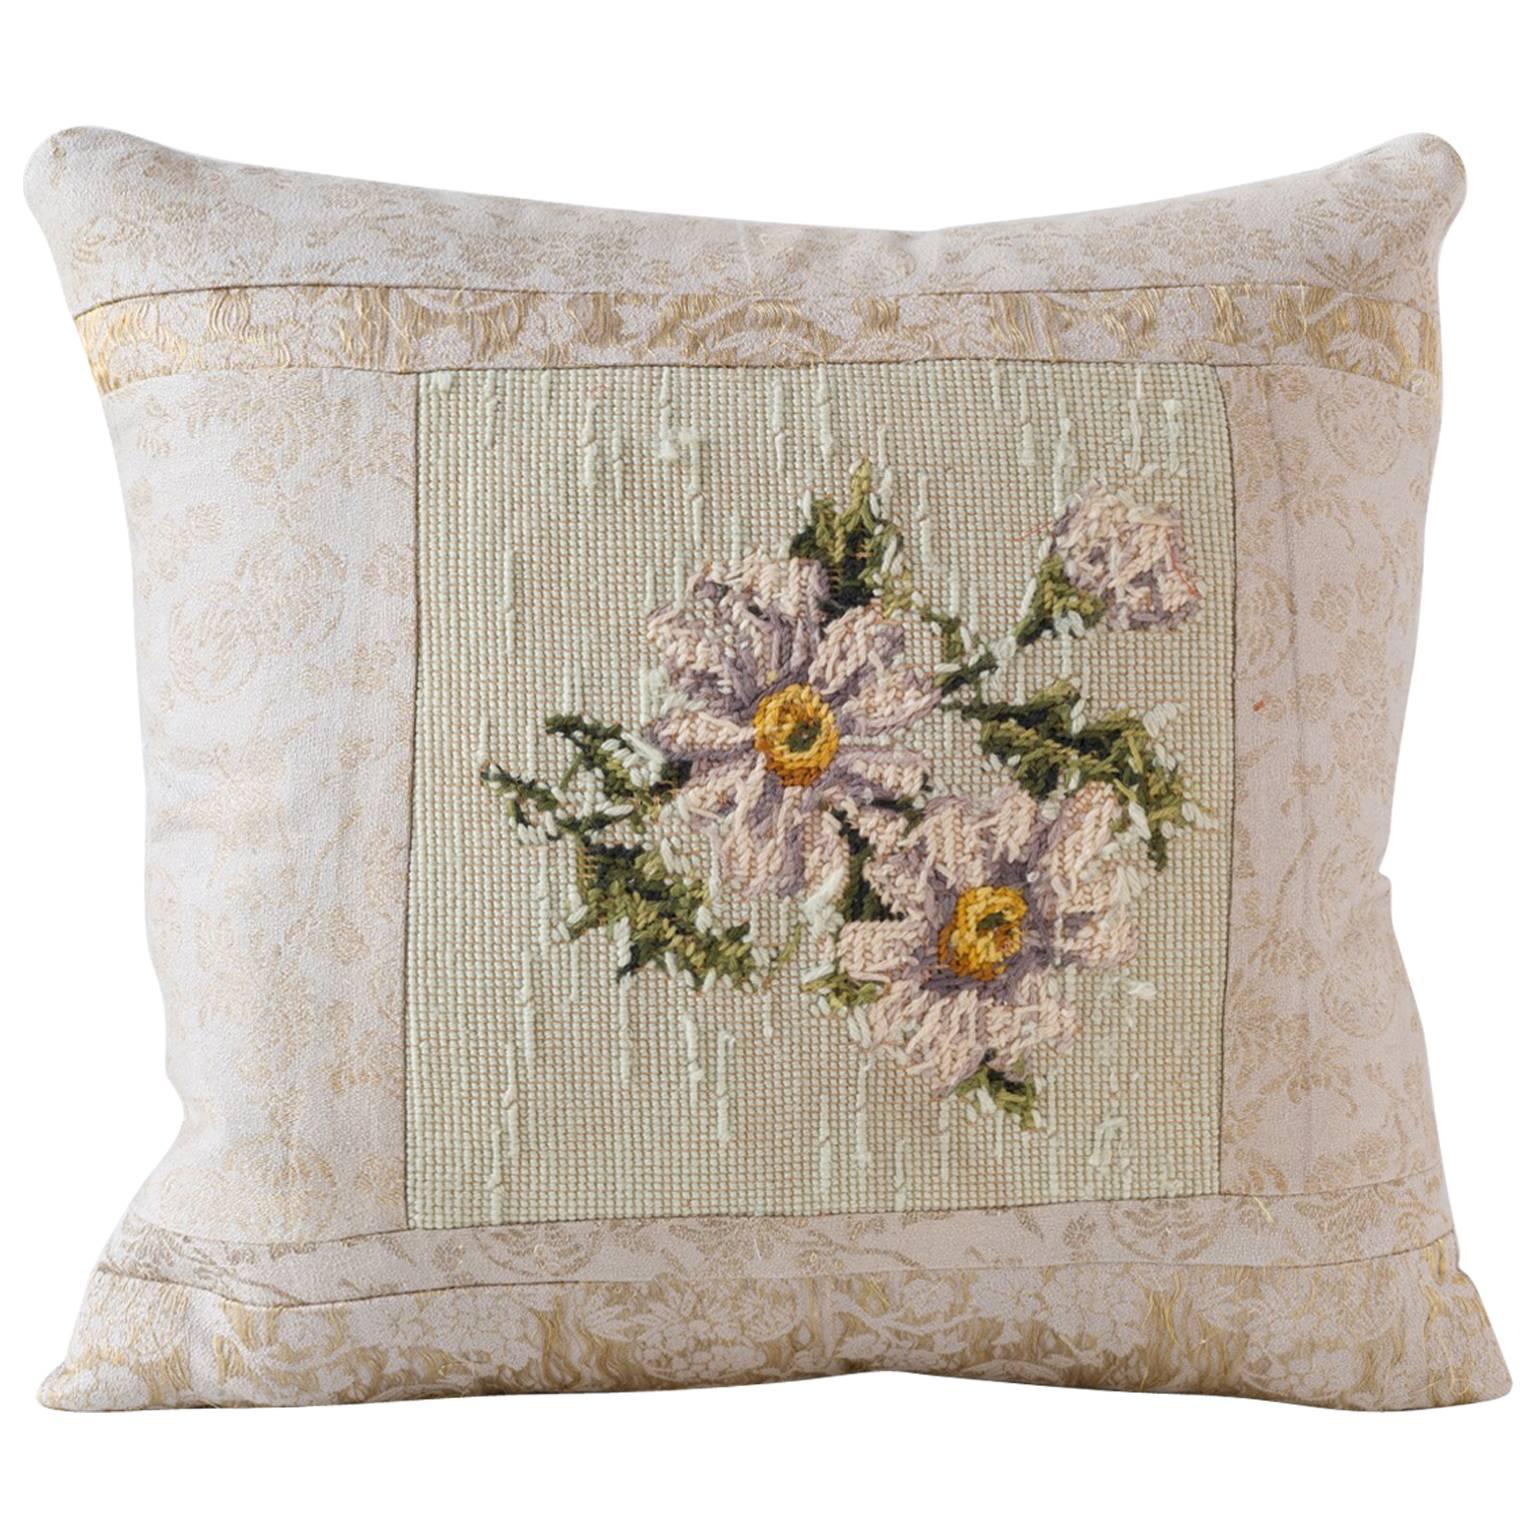 Reverse Needlpoint Pillow with Japanese Brocade Textile Cushion For Sale